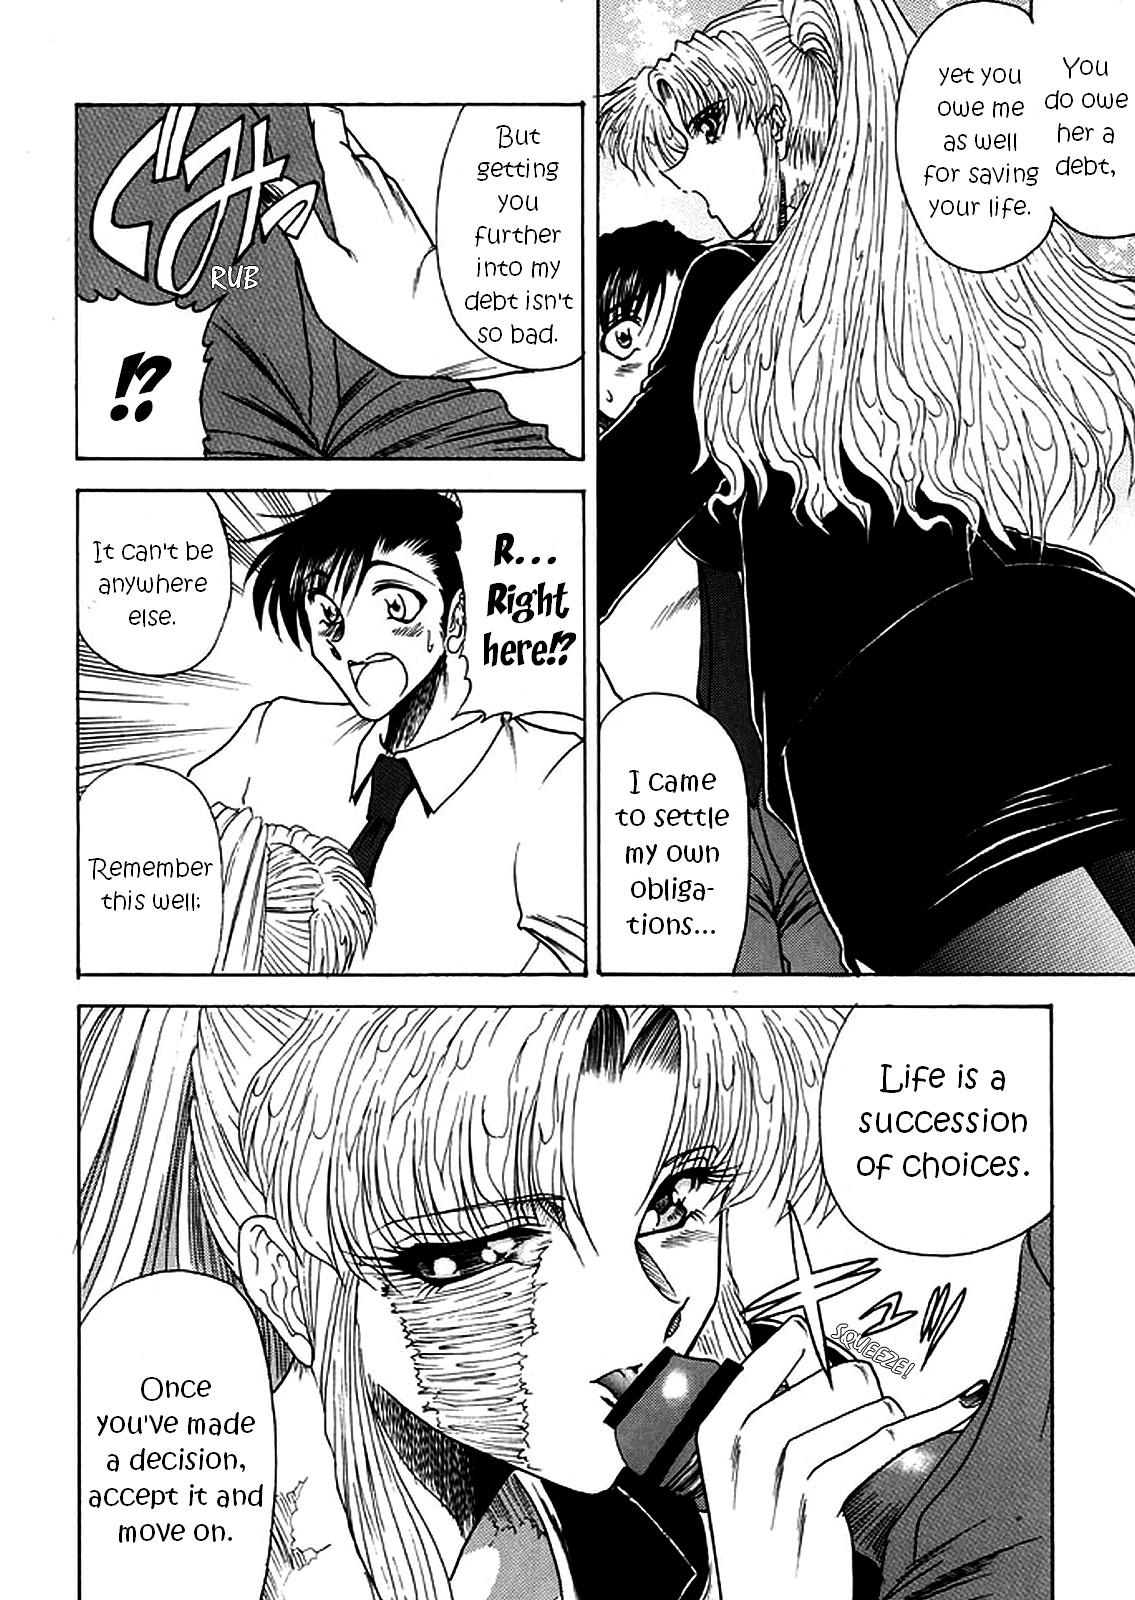 Sis ZONE 40 A shot of the requiem - Black lagoon Gorda - Page 12